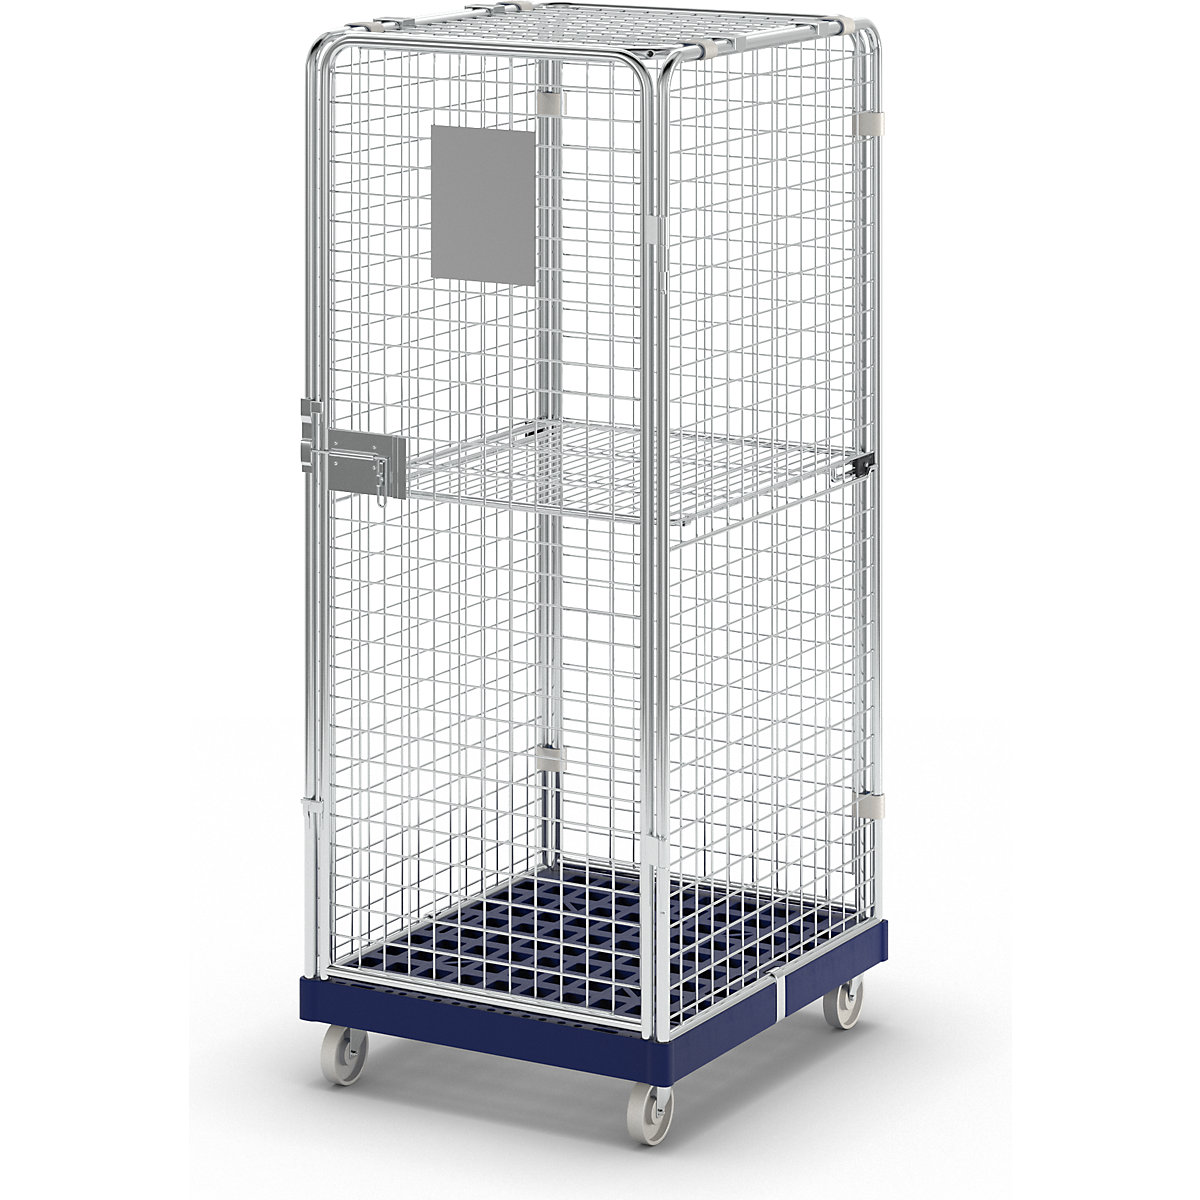 Security roll container with plastic dolly